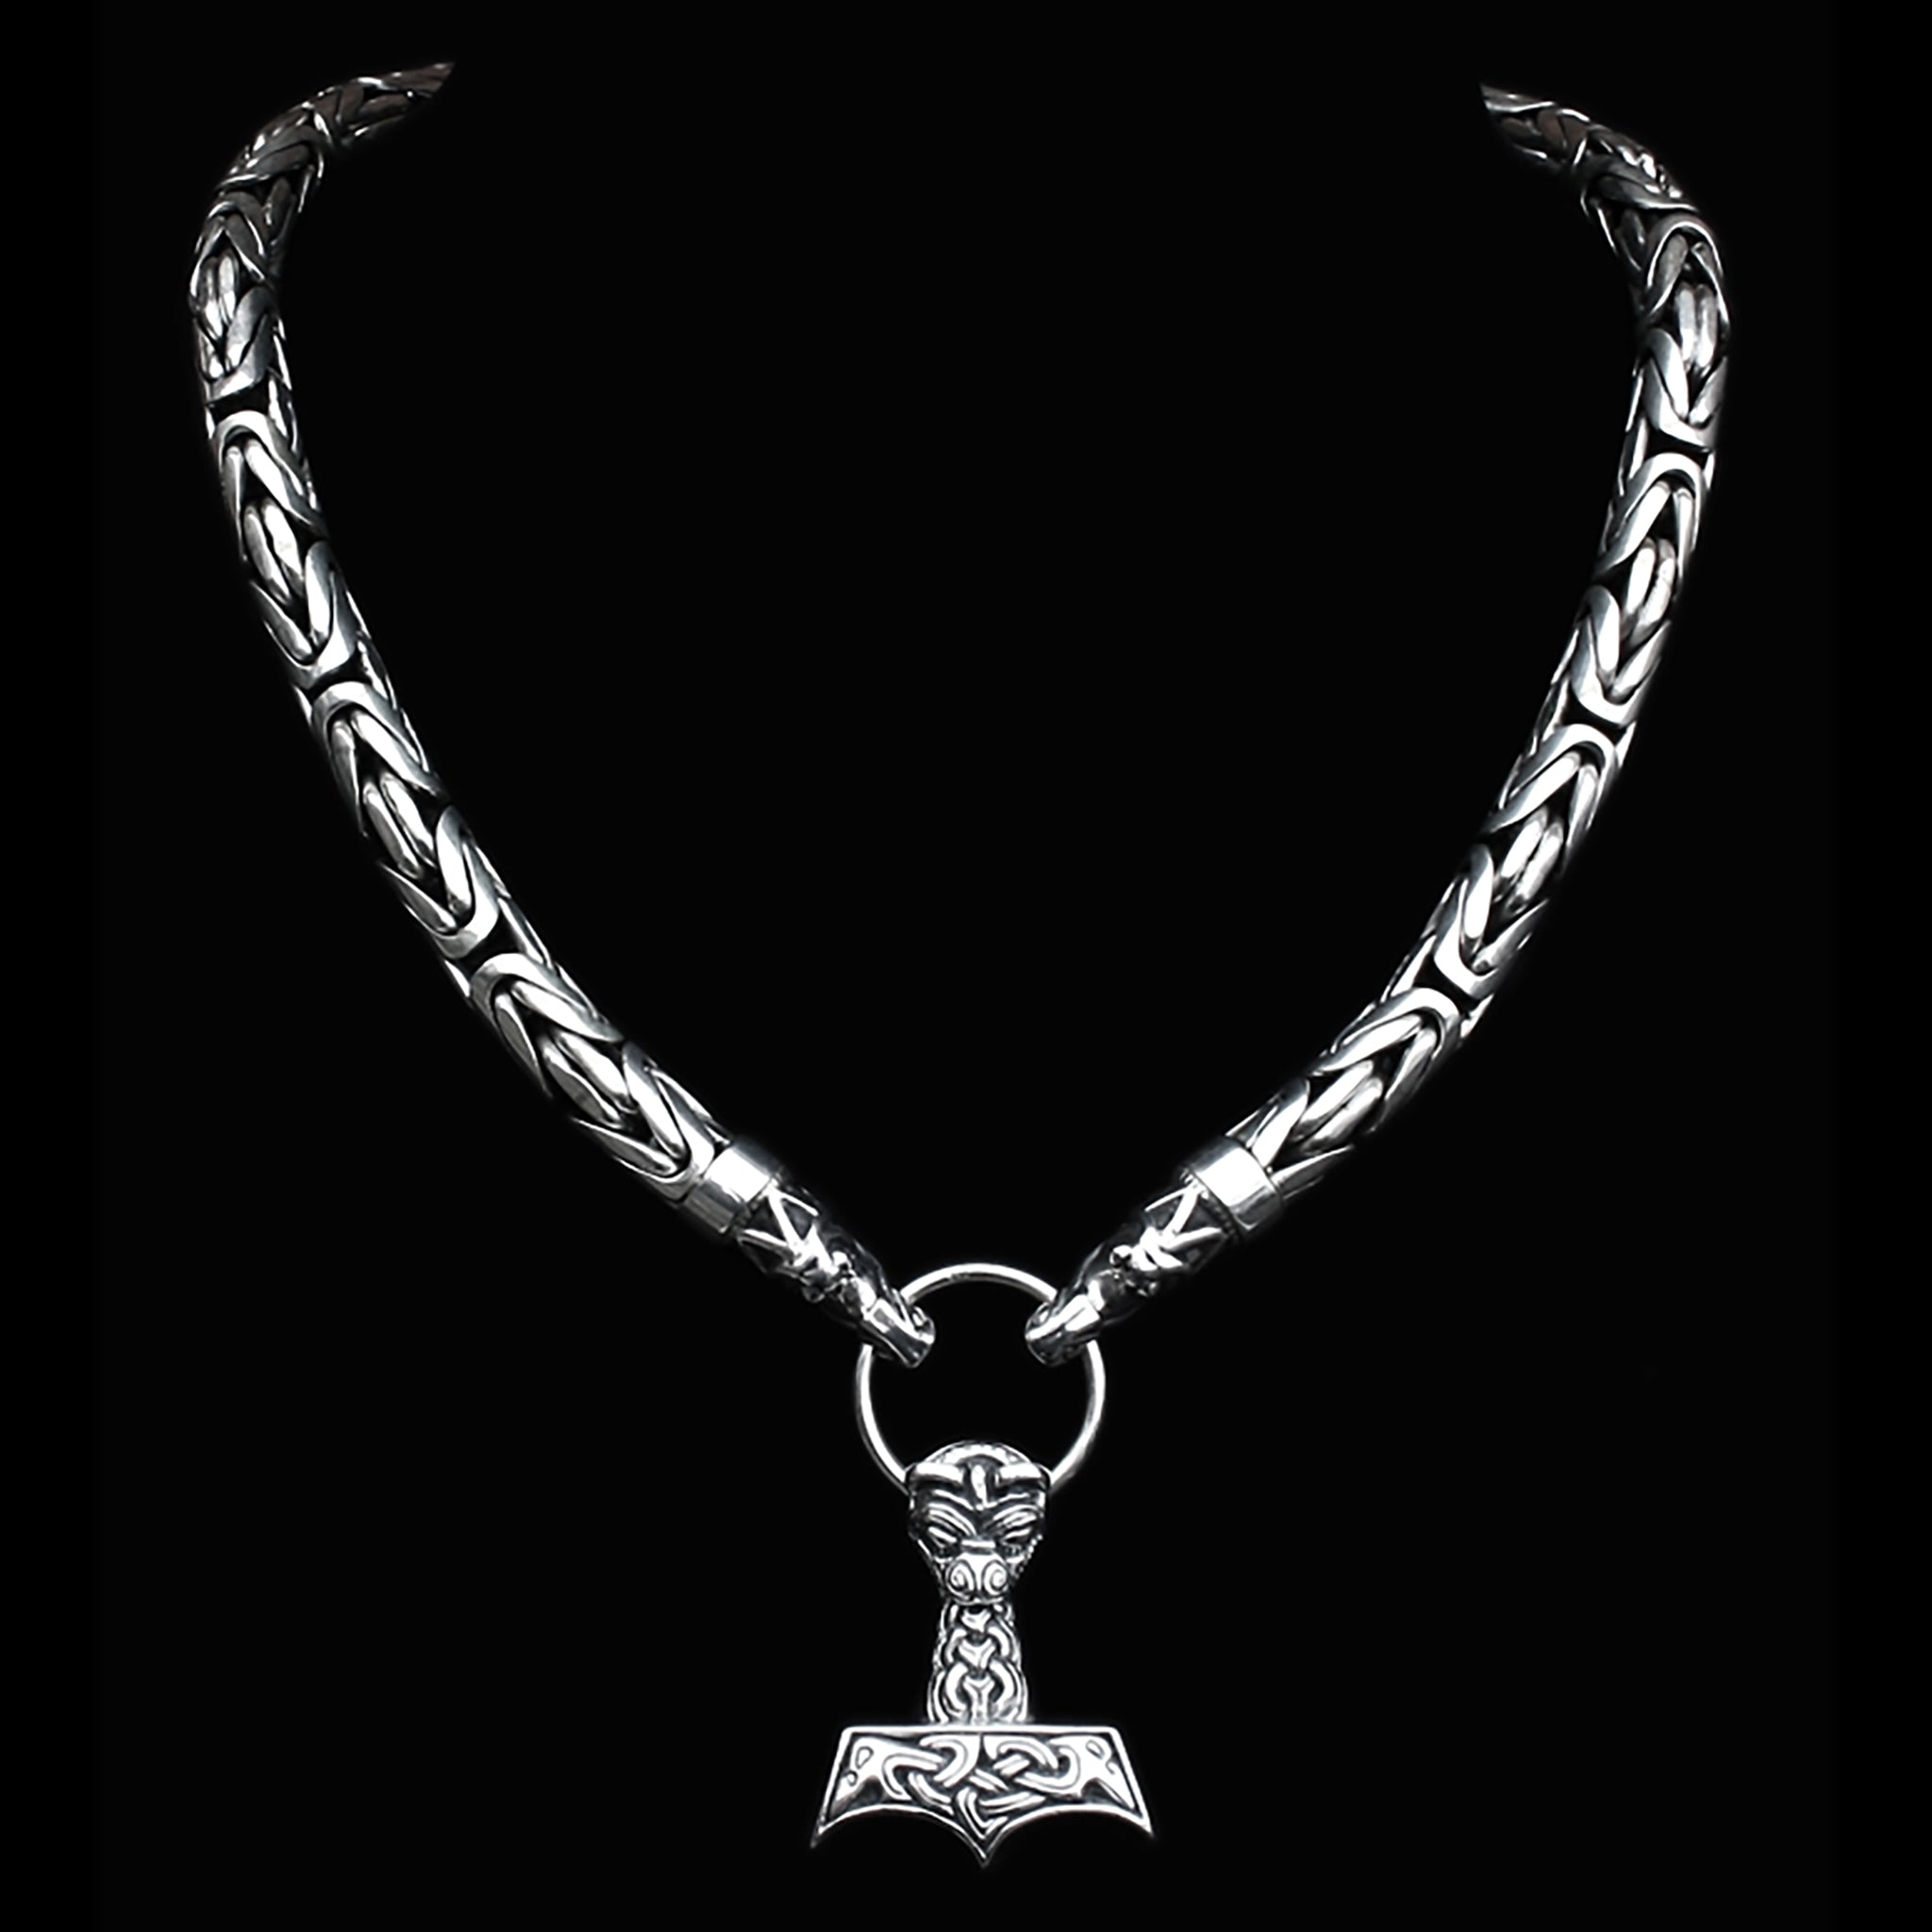 10mm Silver King Chain Necklace with Gotland Dragon Heads